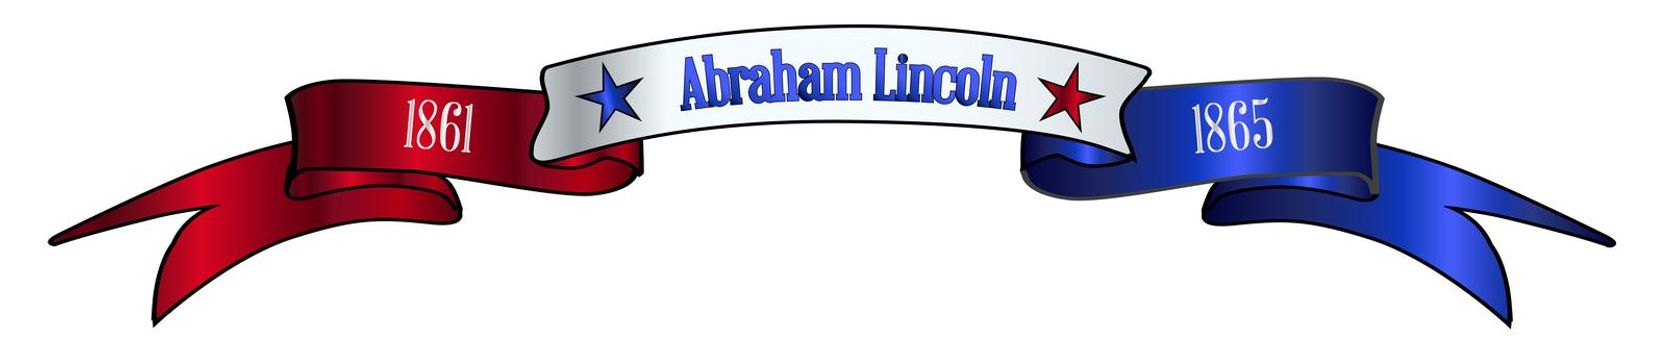 A red white and blue satin or silk ribbon banner with the text Abraham Lincoln and stars and date in office